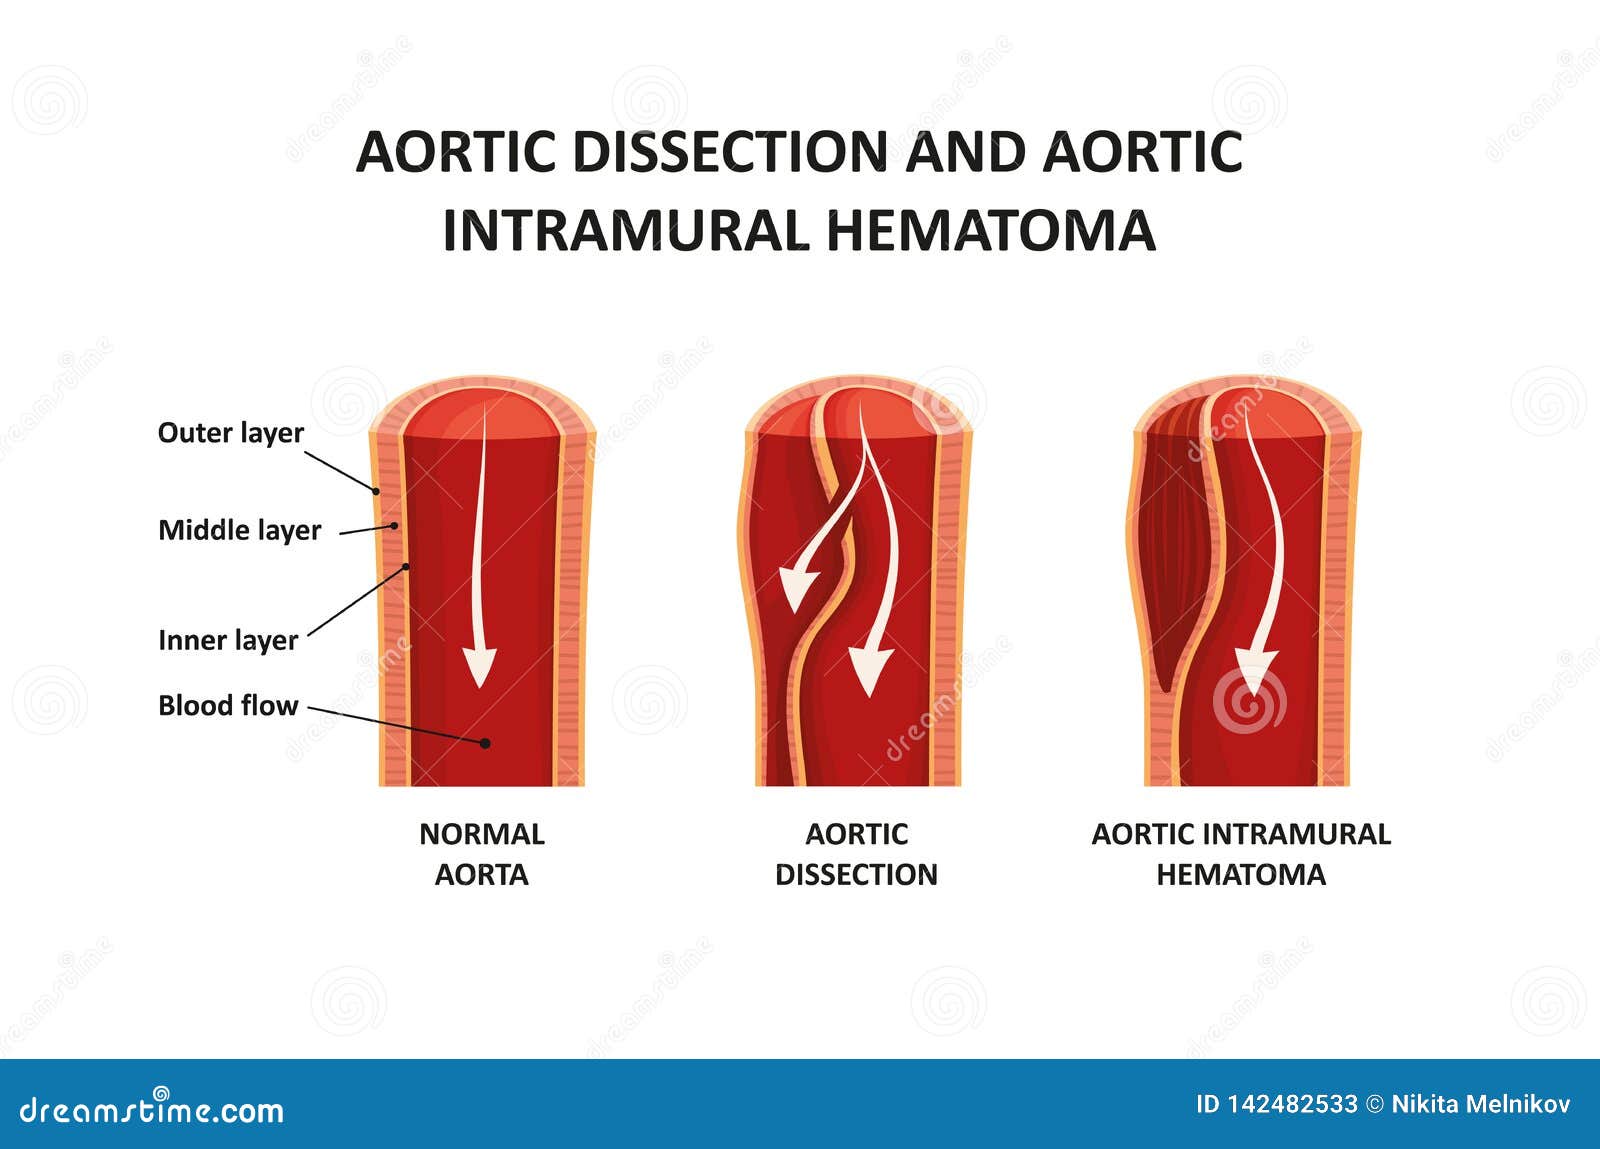 aortic dissection and aortic intramural hematoma